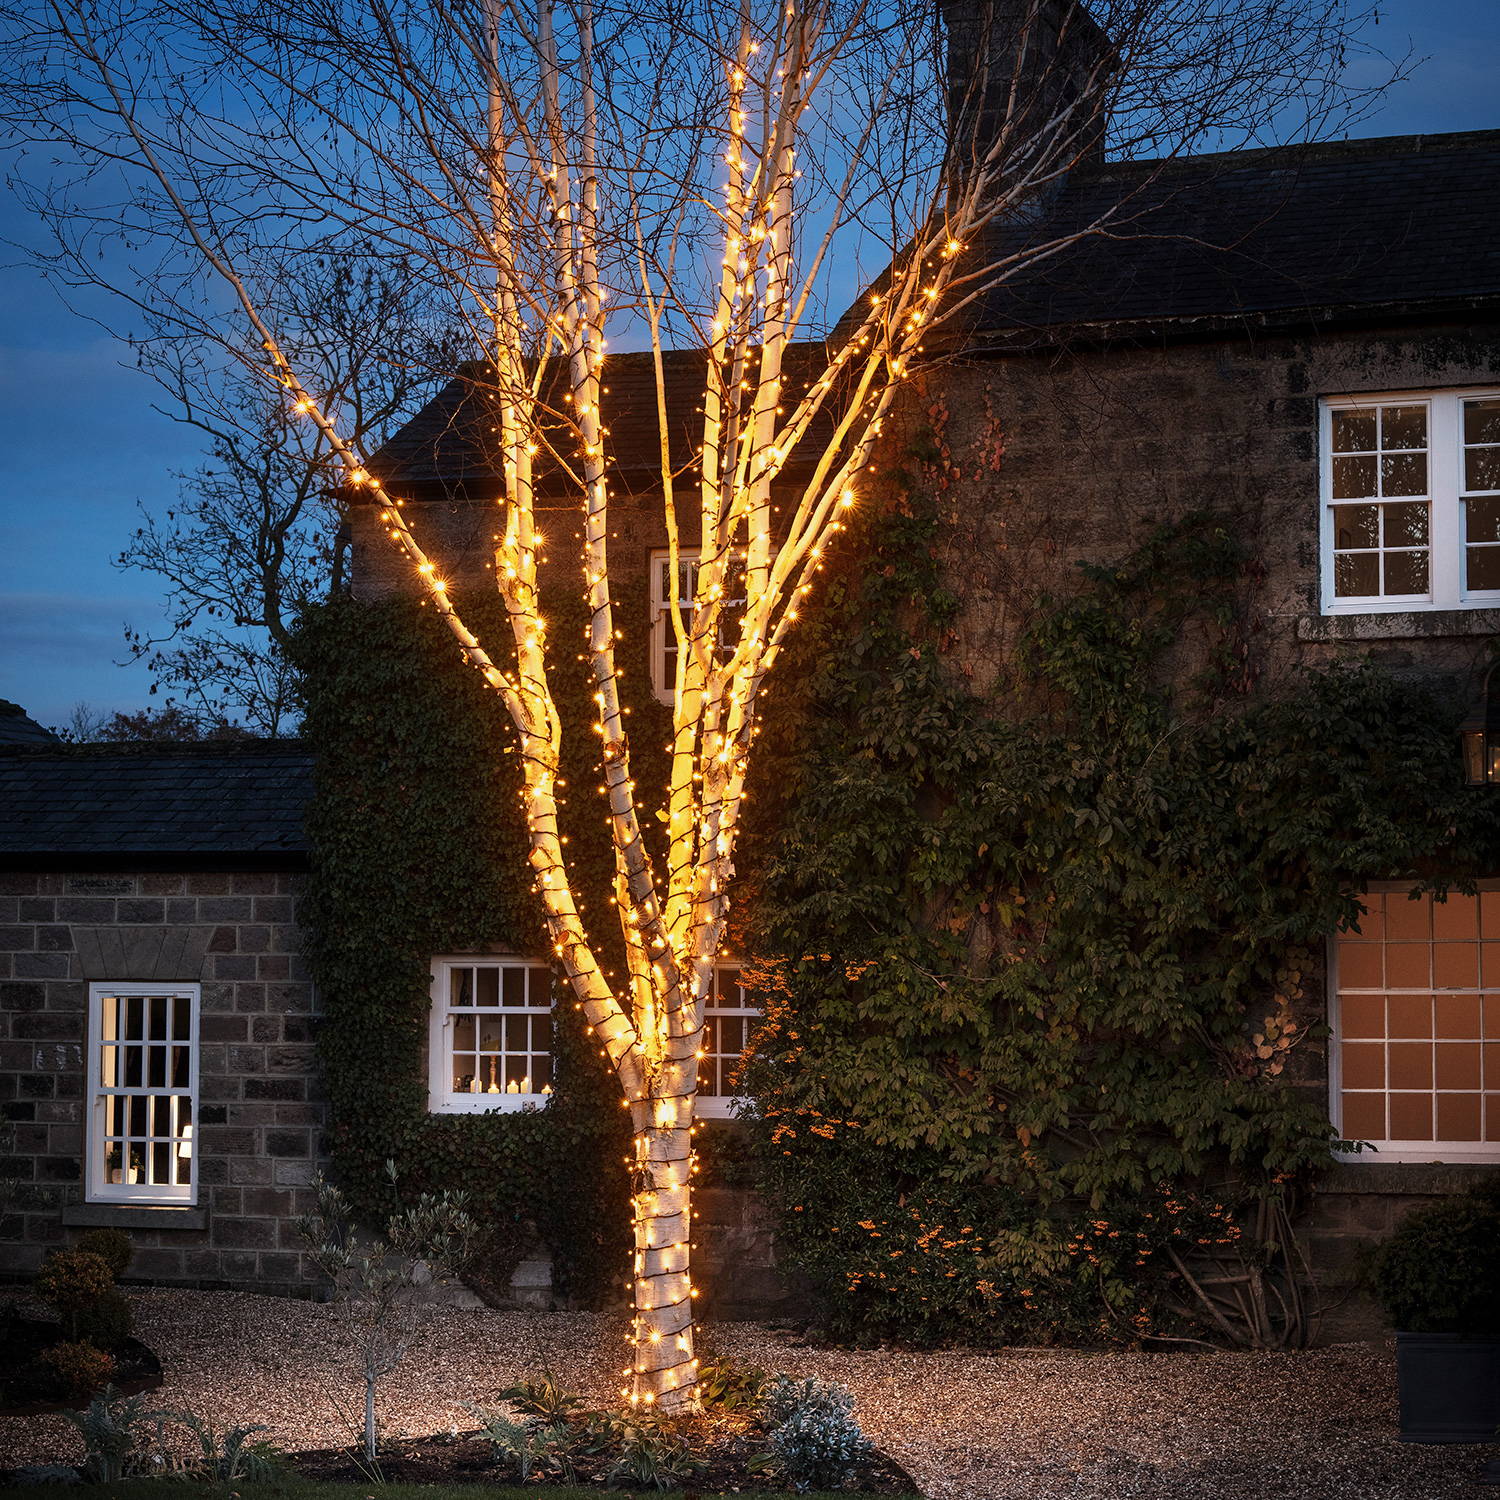 A large tree wrapped in warm white string lights in front of a stone house